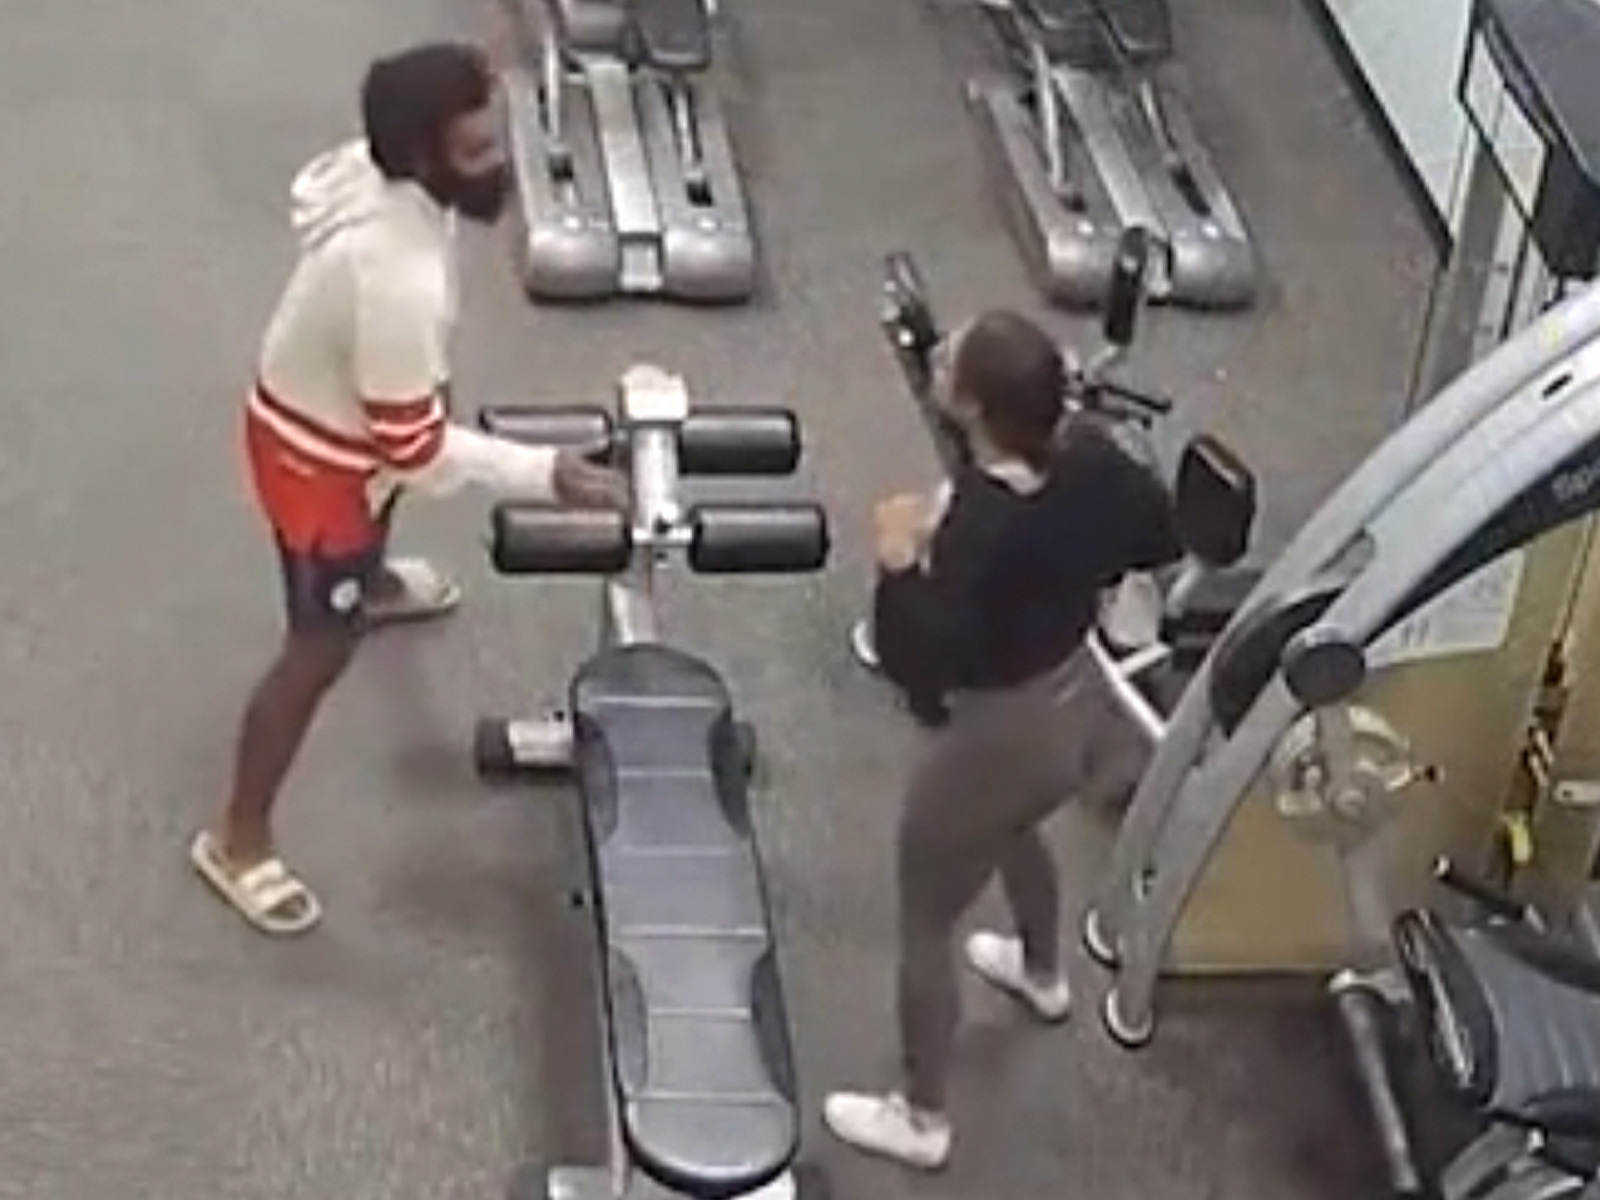 Woman who fought off gym attacker breaks silence